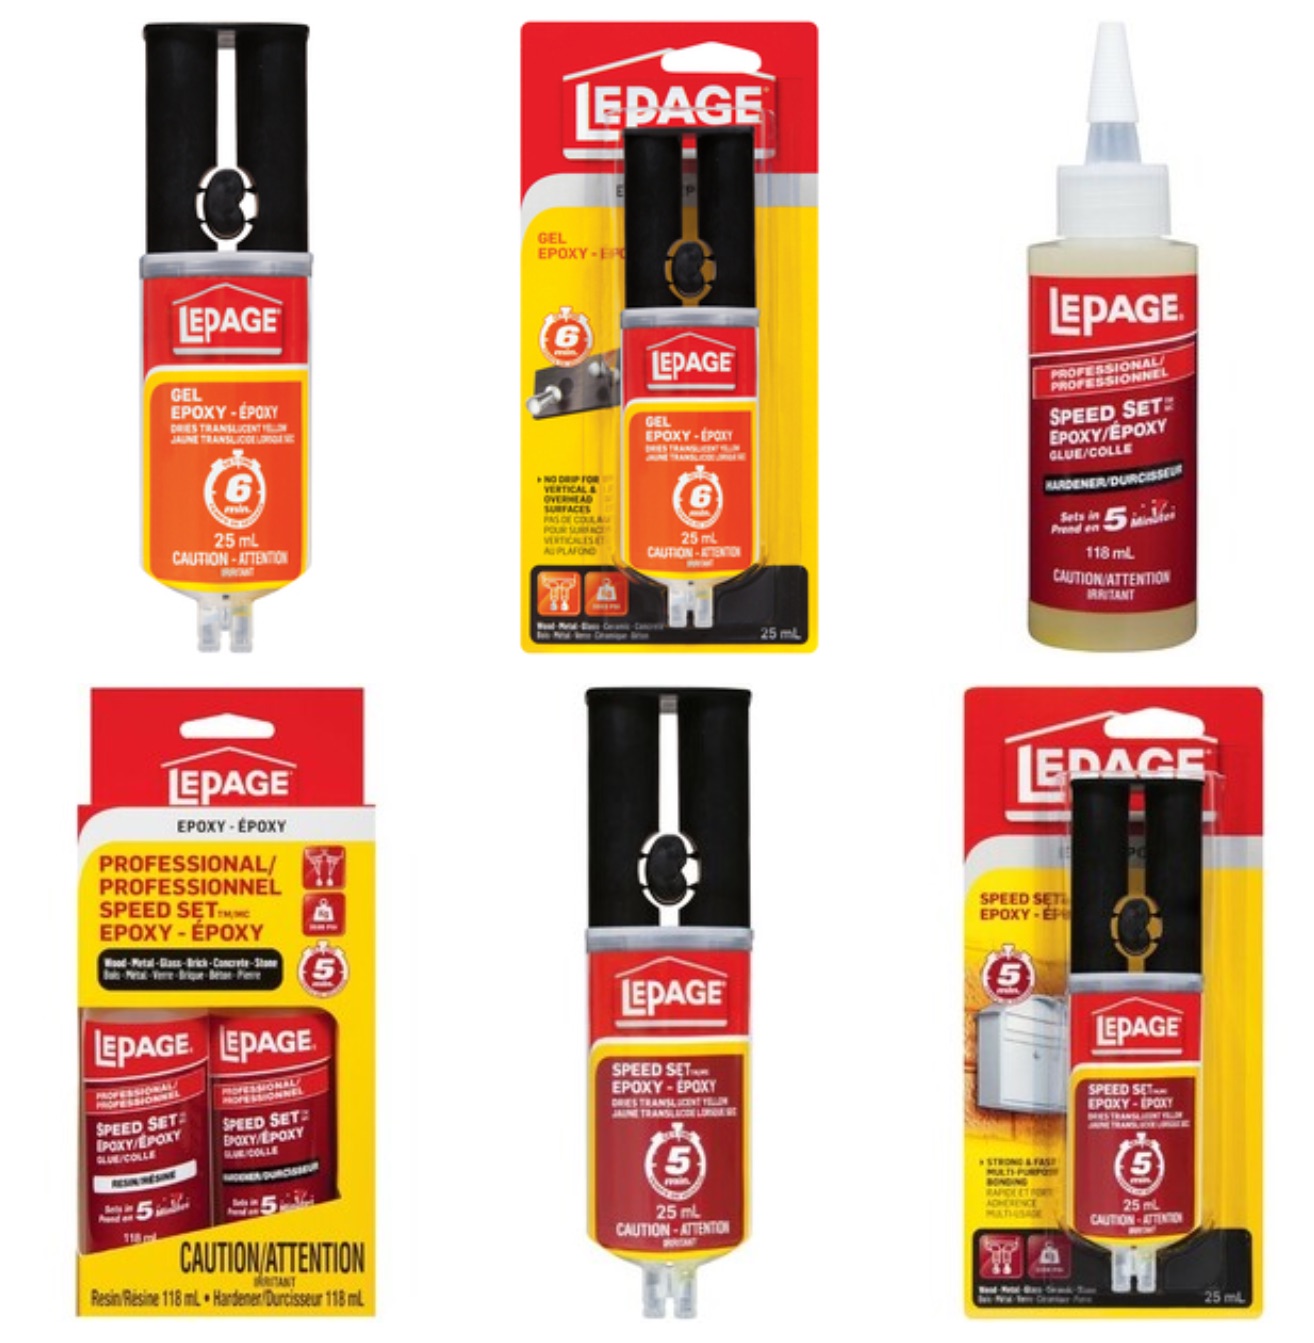 STOP USING': Major recall of nearly 900,000 adhesive products sold at Home  Depot, Lowe's, Canadian Tire and other stores triggers Health Canada warning